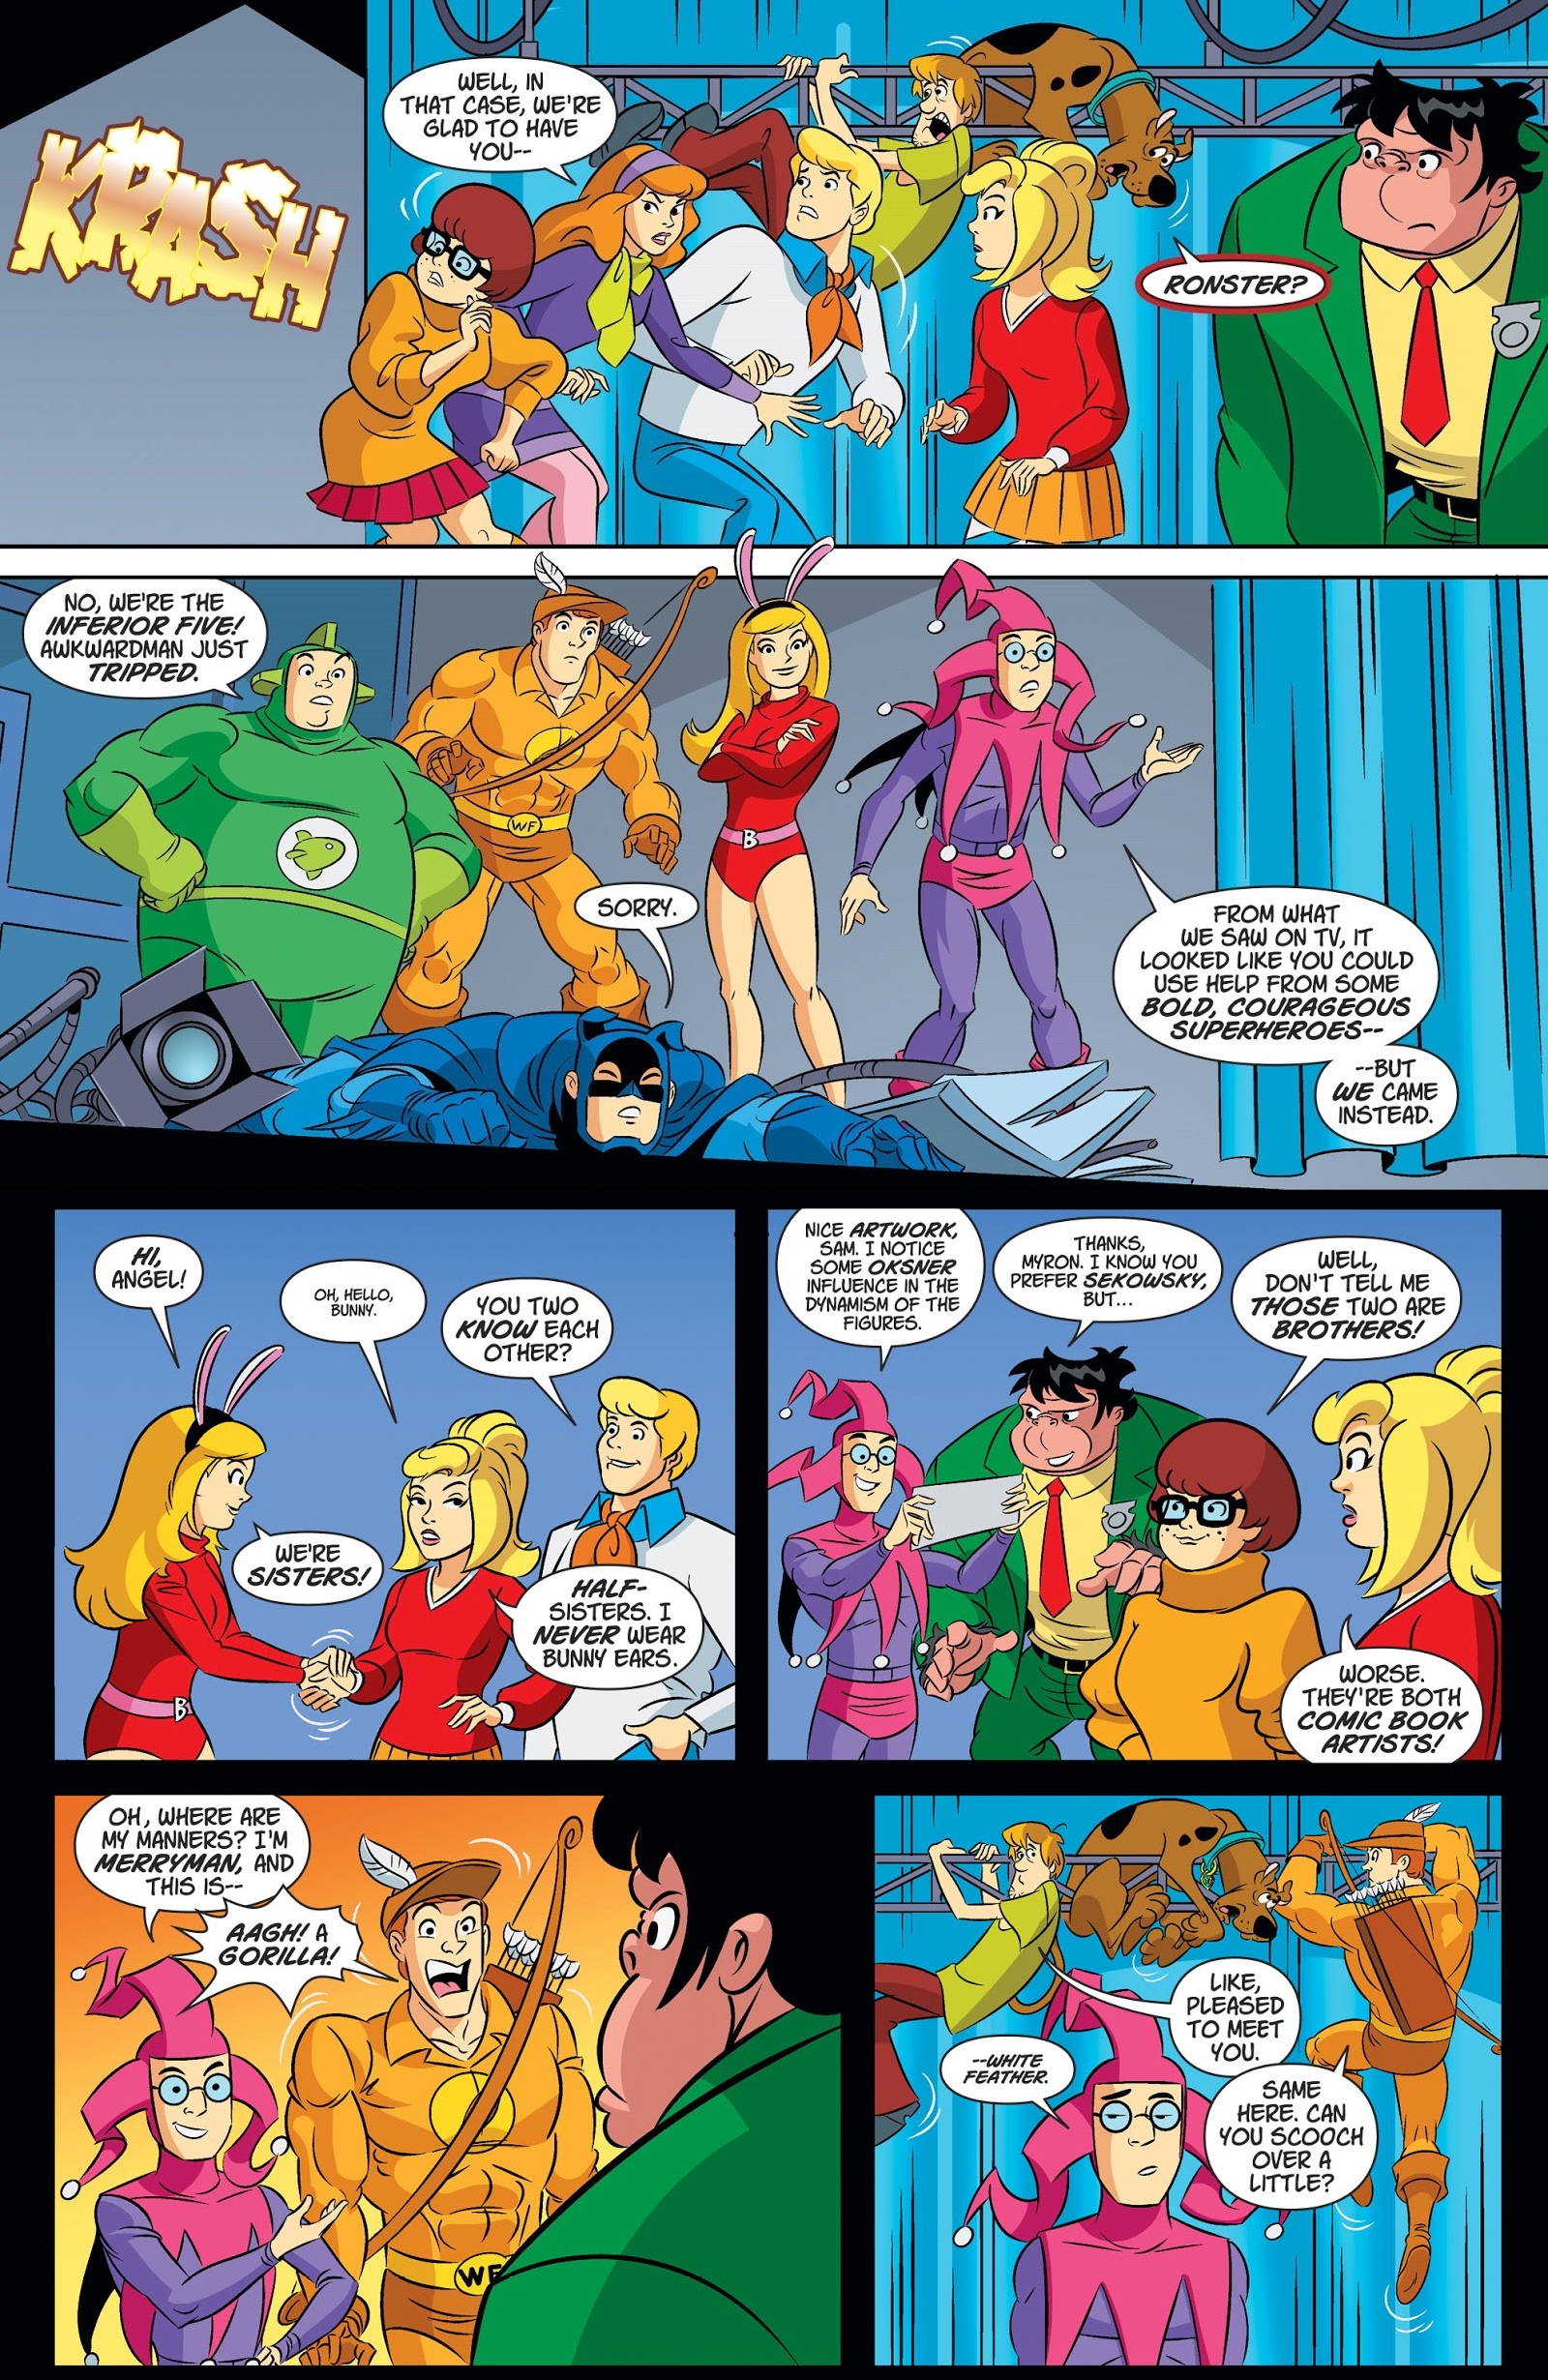 Scooby Doo Team-Up 6 review